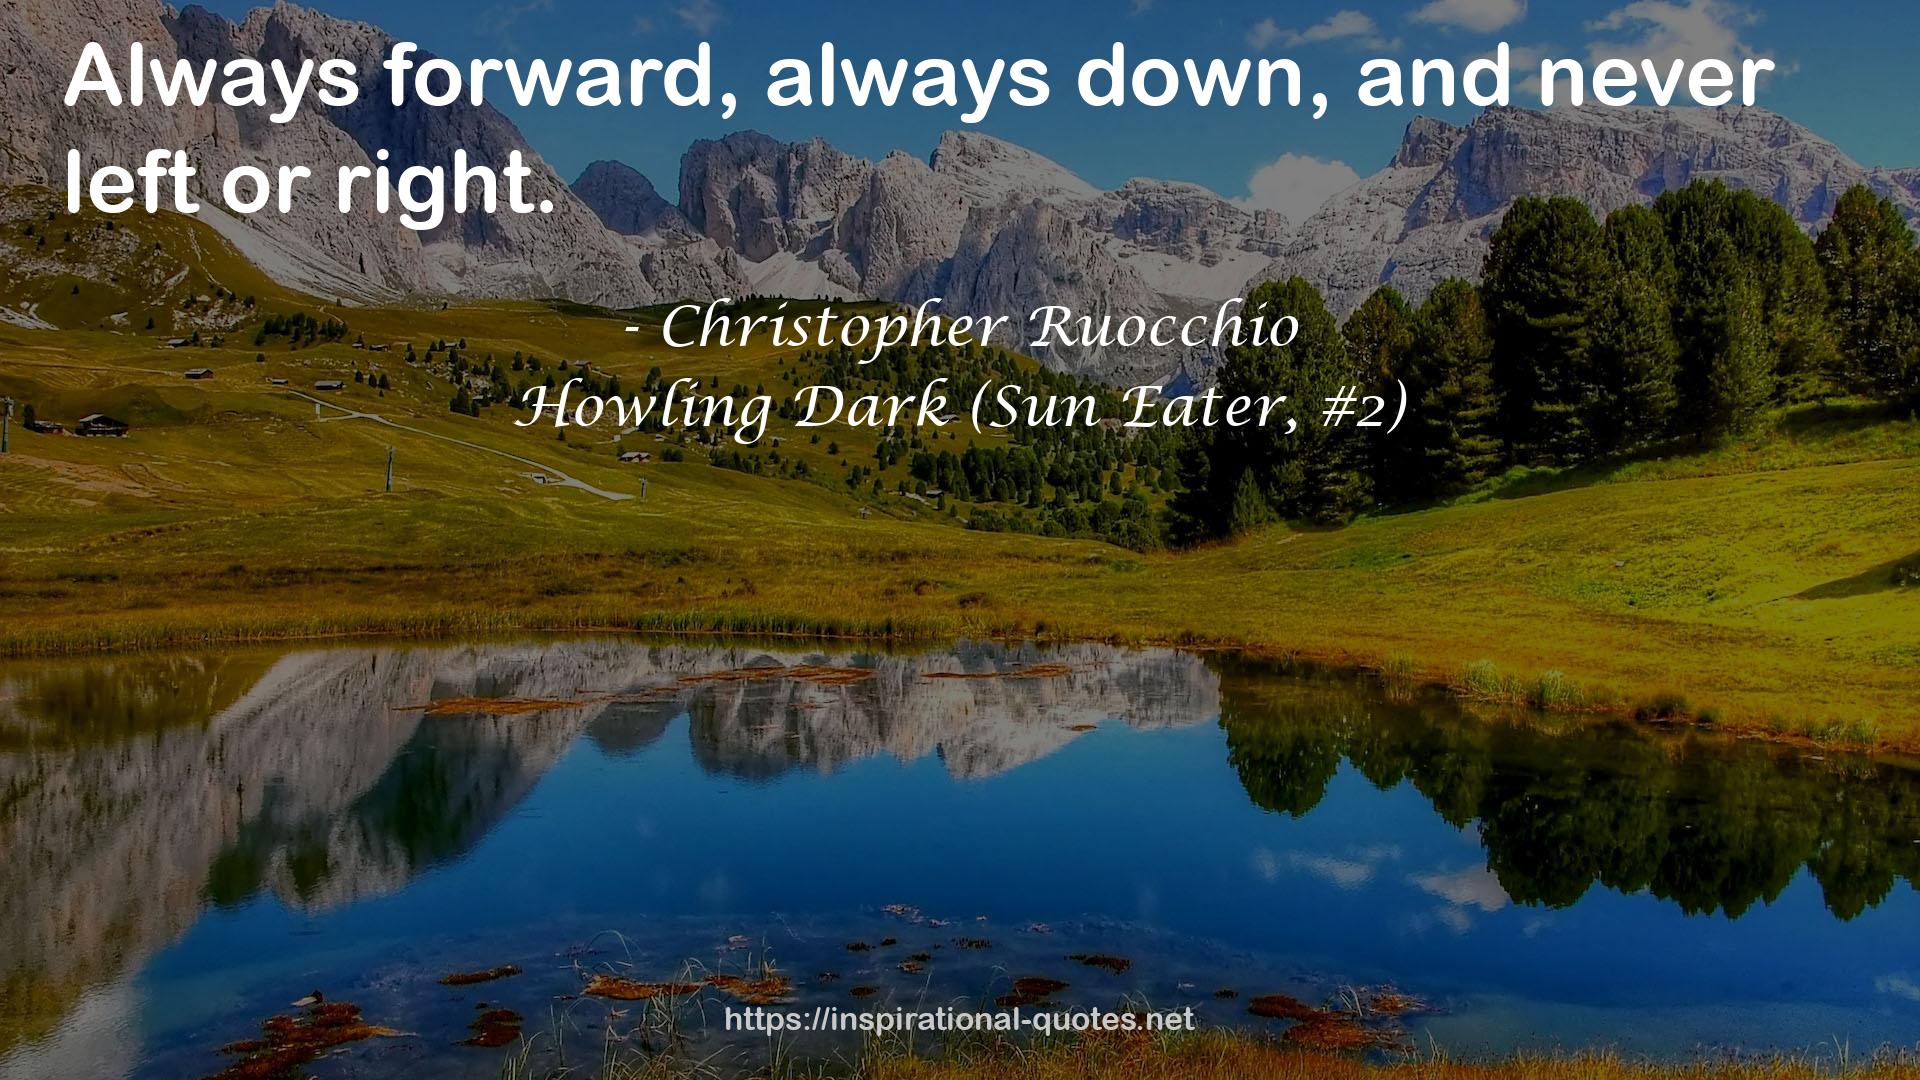 Howling Dark (Sun Eater, #2) QUOTES